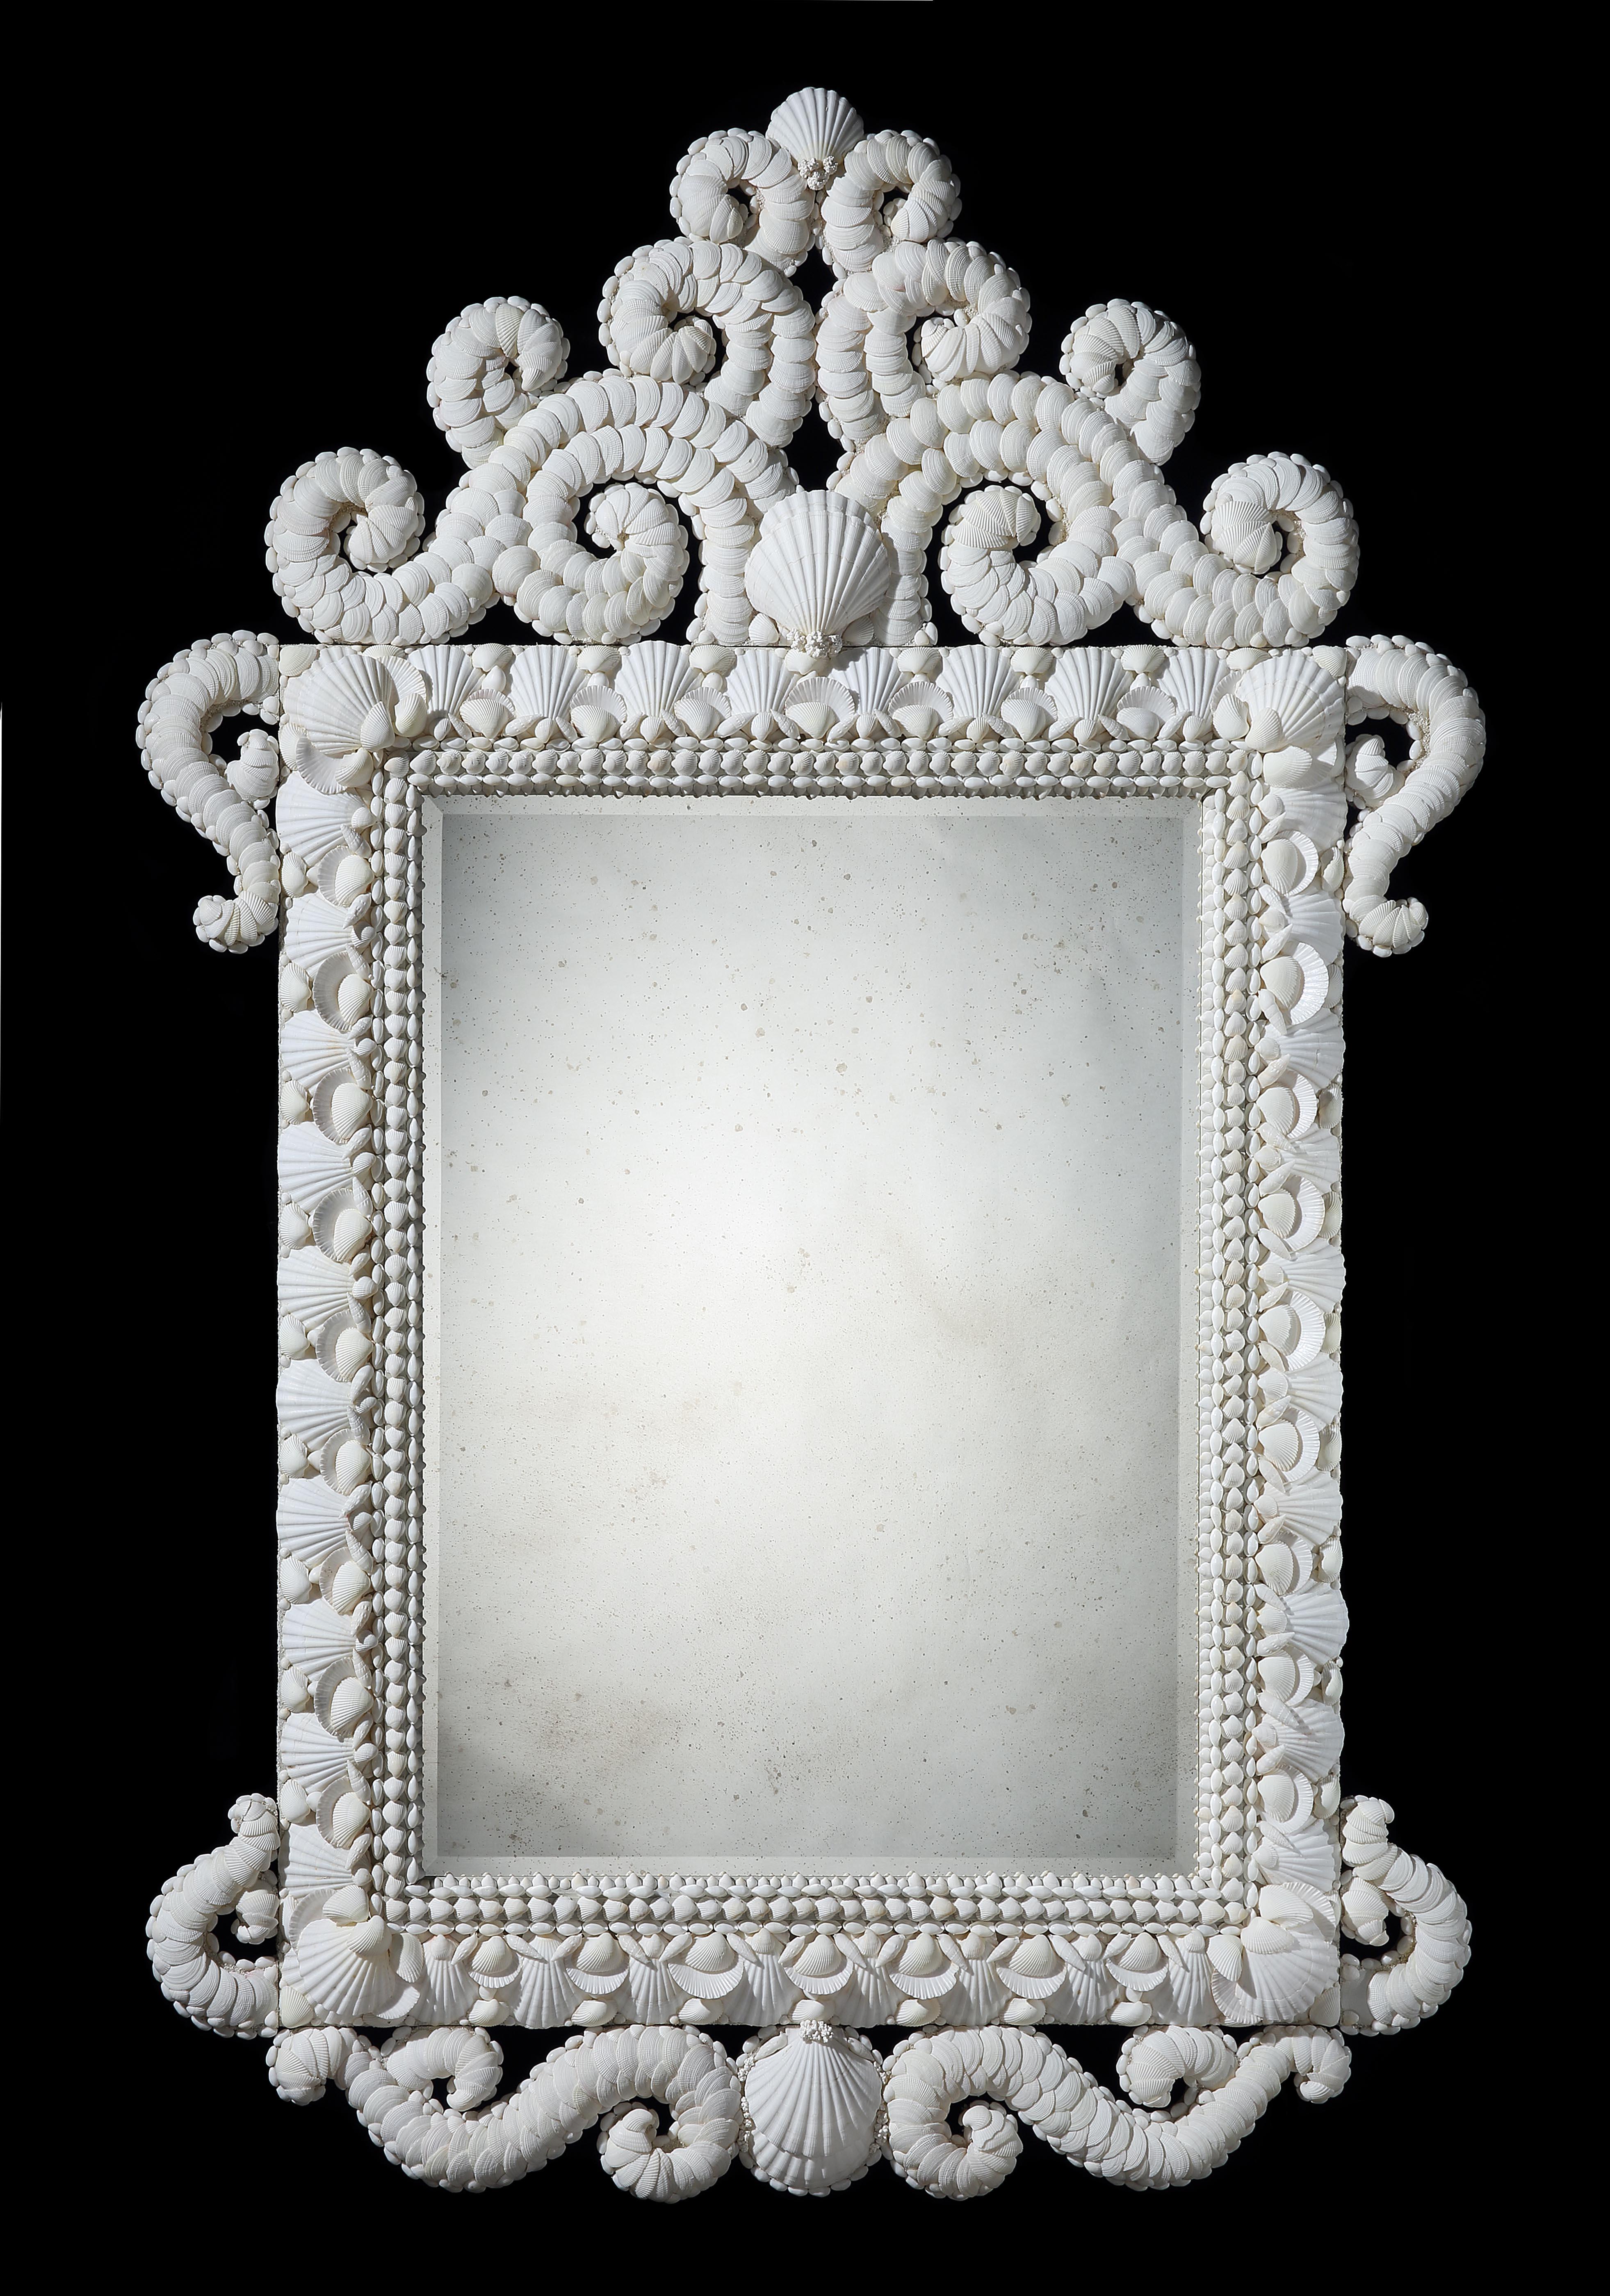 A very fine white shell mirror of large scale with cresting and scrolled sides and apron. The mirror plate beveled and hand distressed.

By Tess Morley.